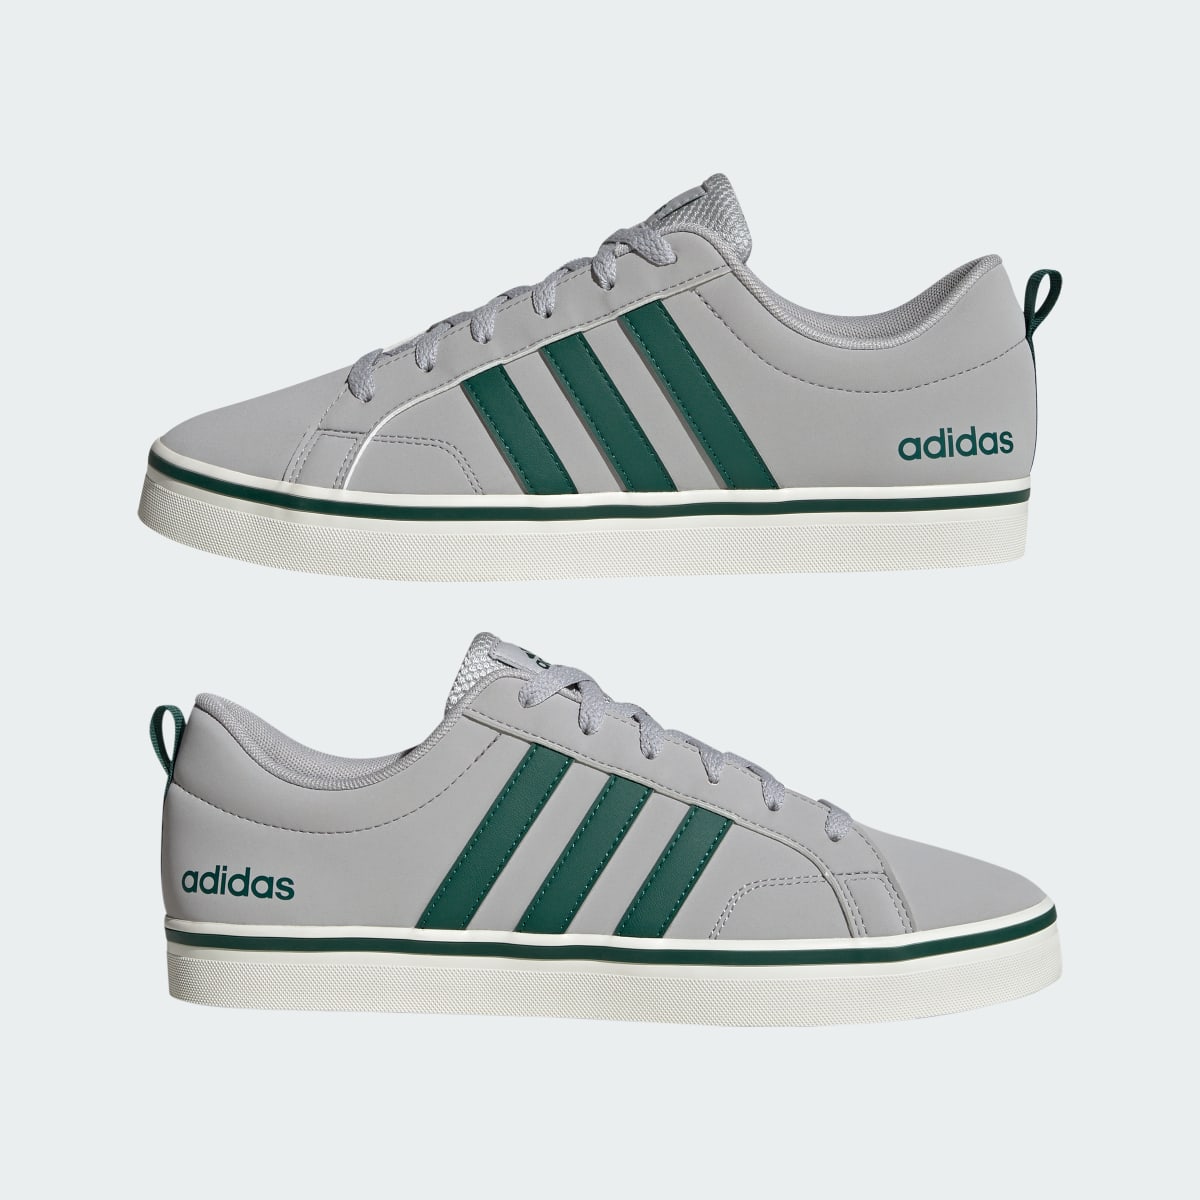 Adidas VS Pace 2.0 Lifestyle Skateboarding Shoes. 8